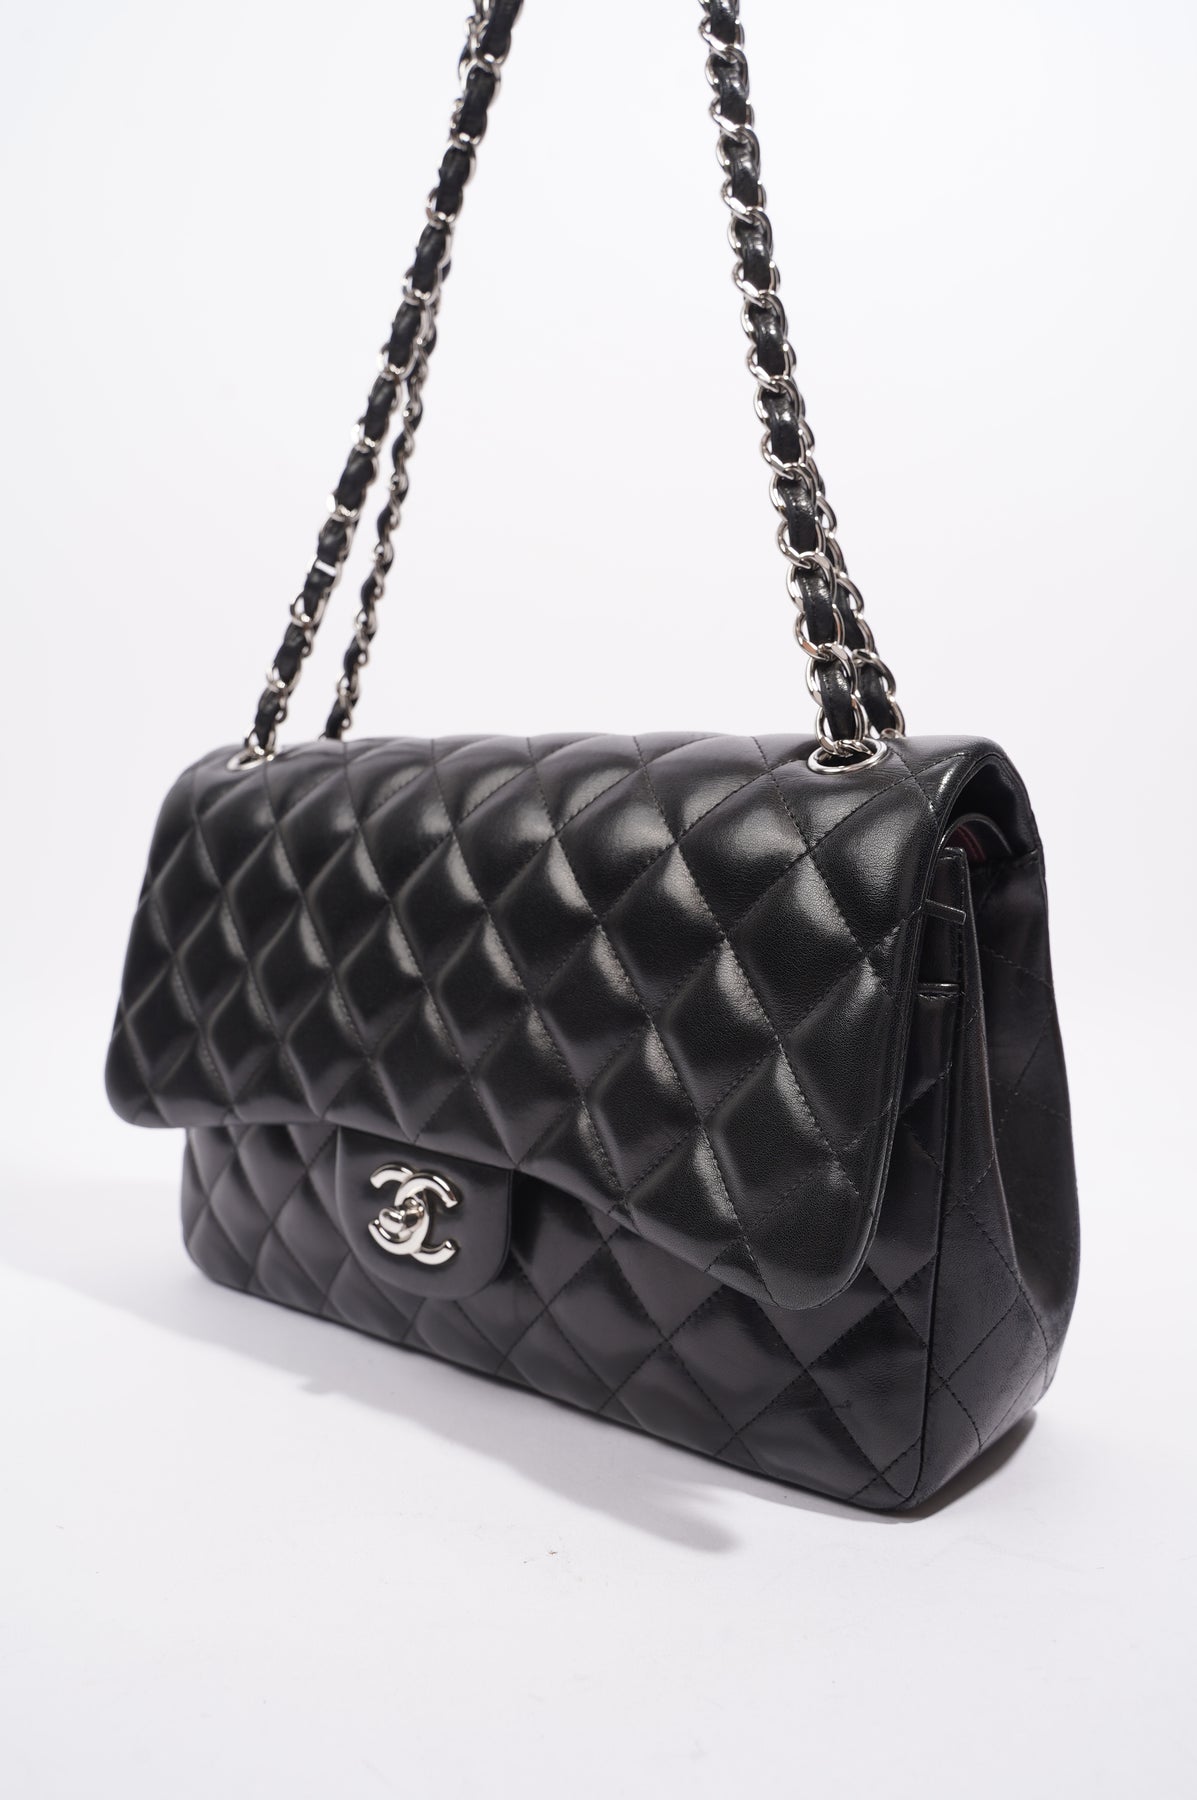 Chanel Women Large Flap Bag with Top Handle in Grained Calfskin Leather- Black - LULUX